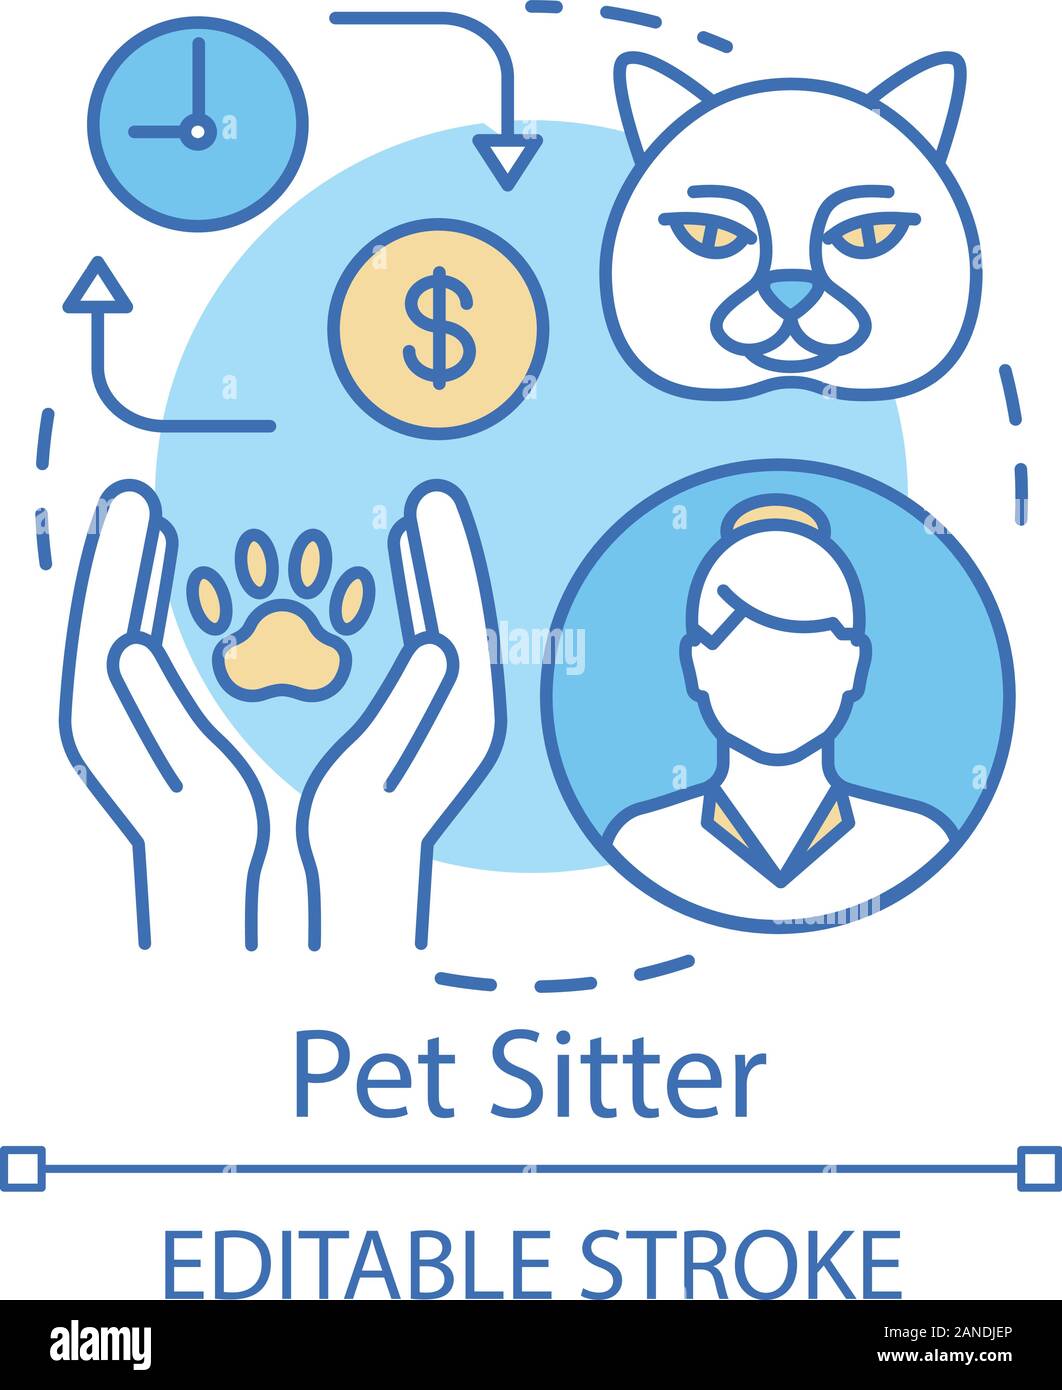 Pet Sitter Near Me Jobs / How To A House Sitter In